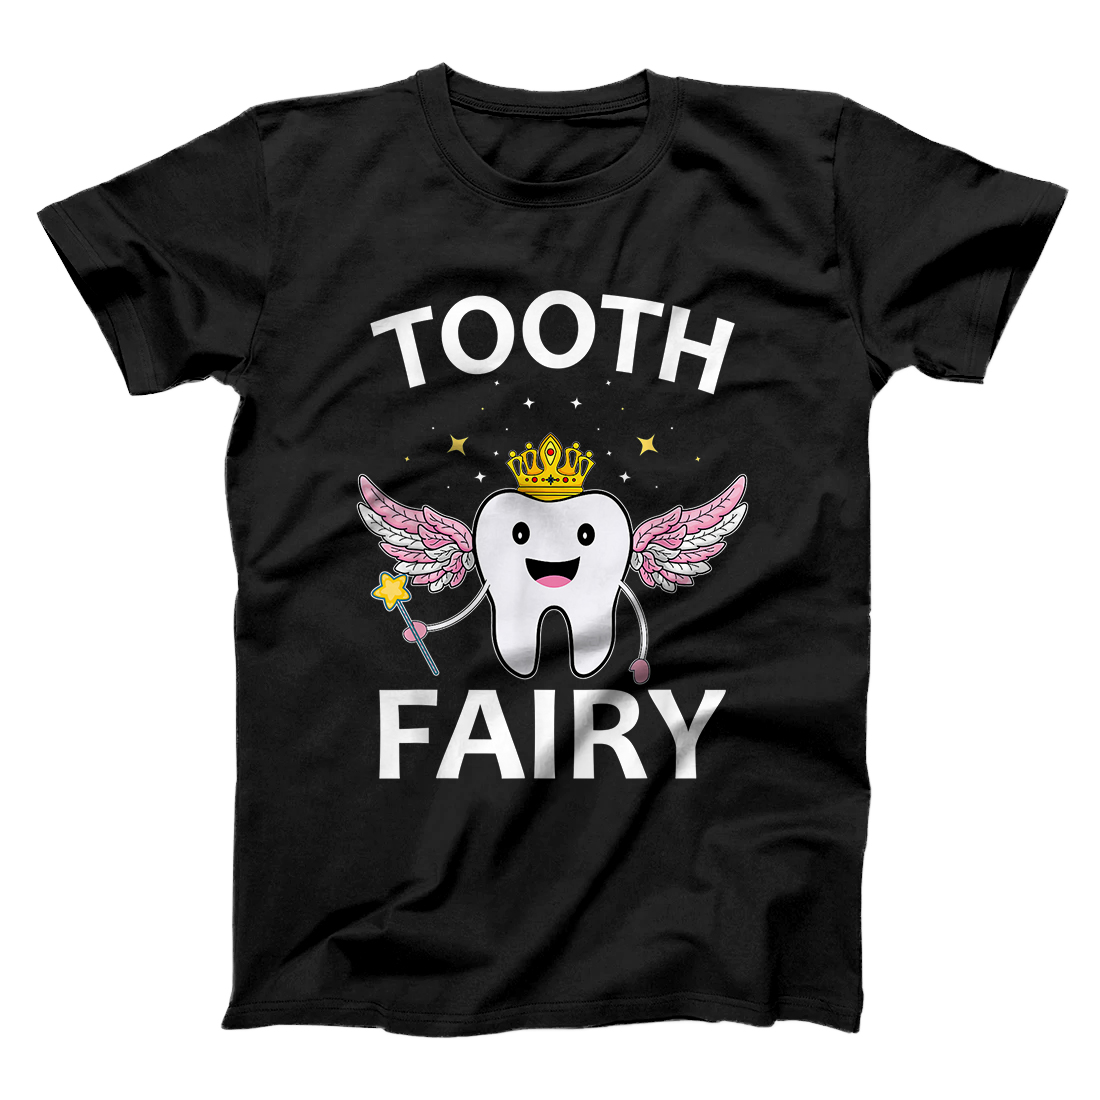 Personalized Funny Tooth Fairy Halloween Costume T-Shirt